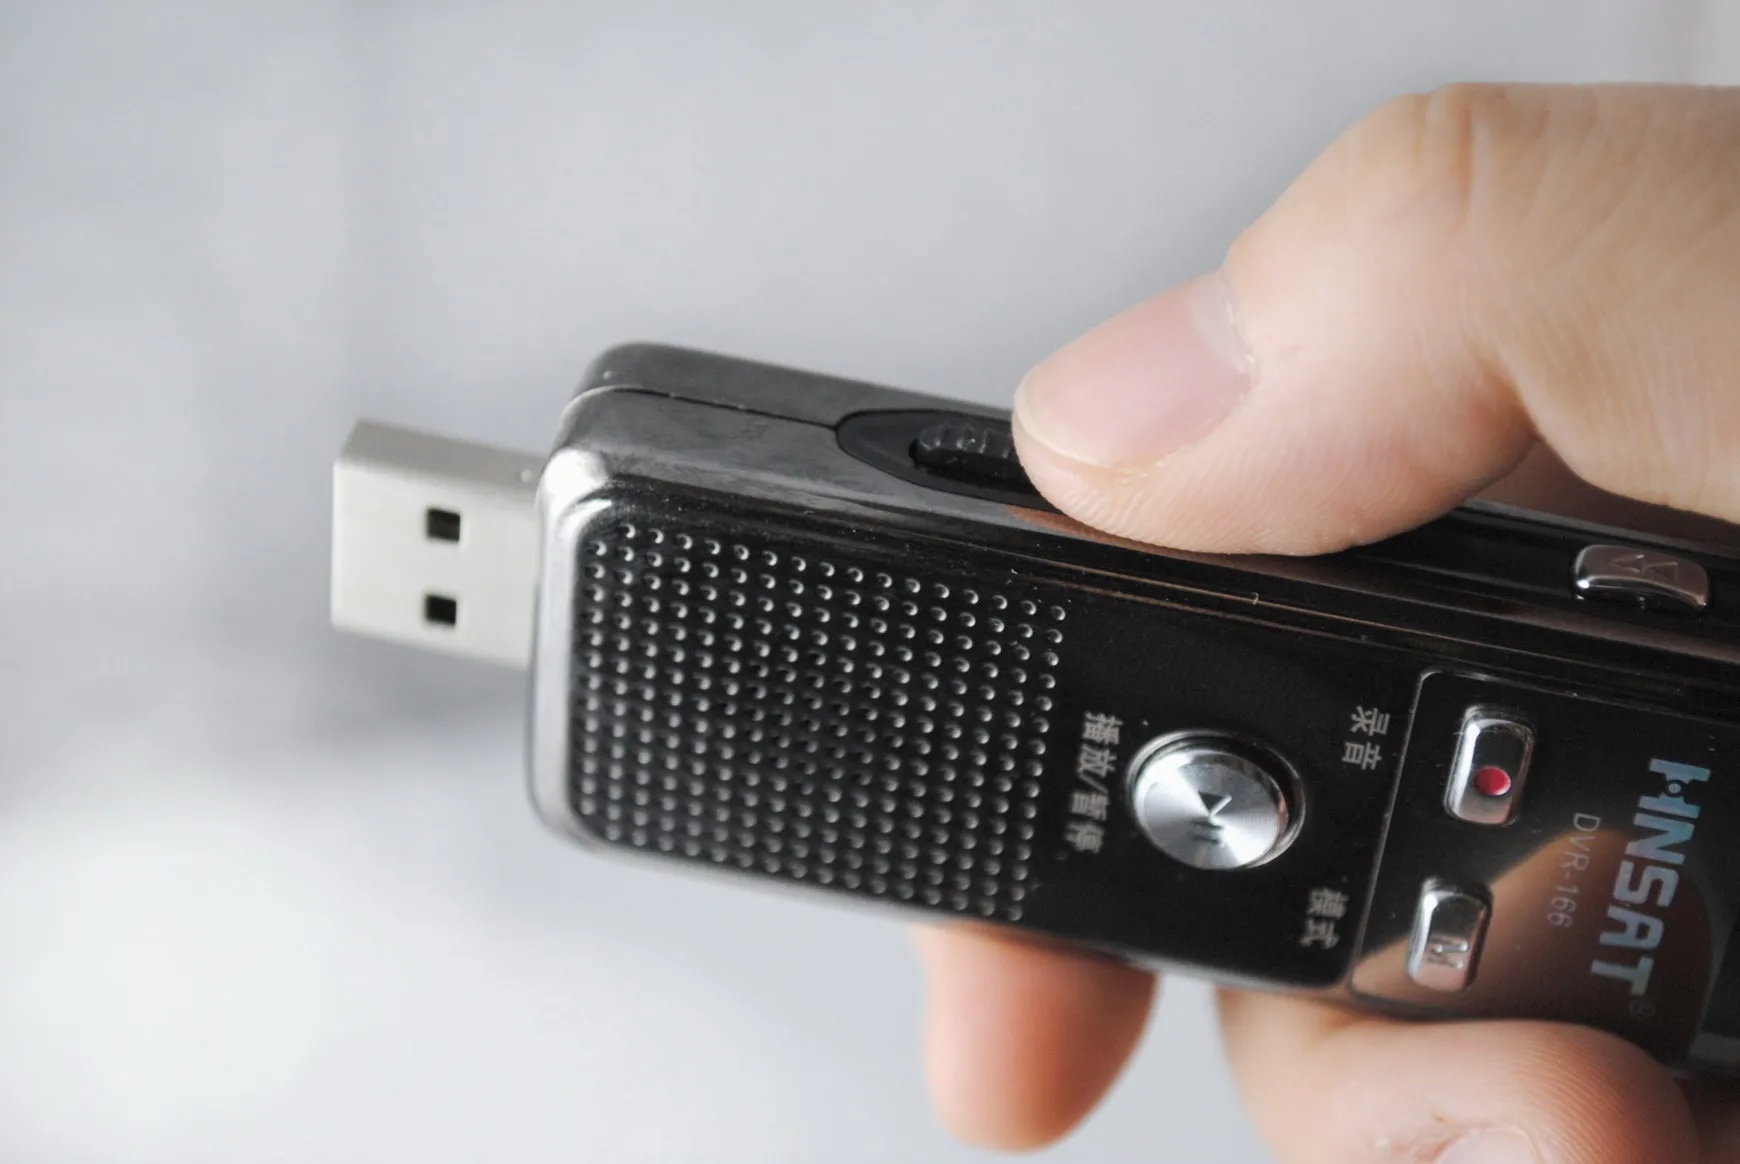 Hot Sale 8GB Dual Microphone FM Radio Cheap Retractable USB Audio Recorder Pen With Screen